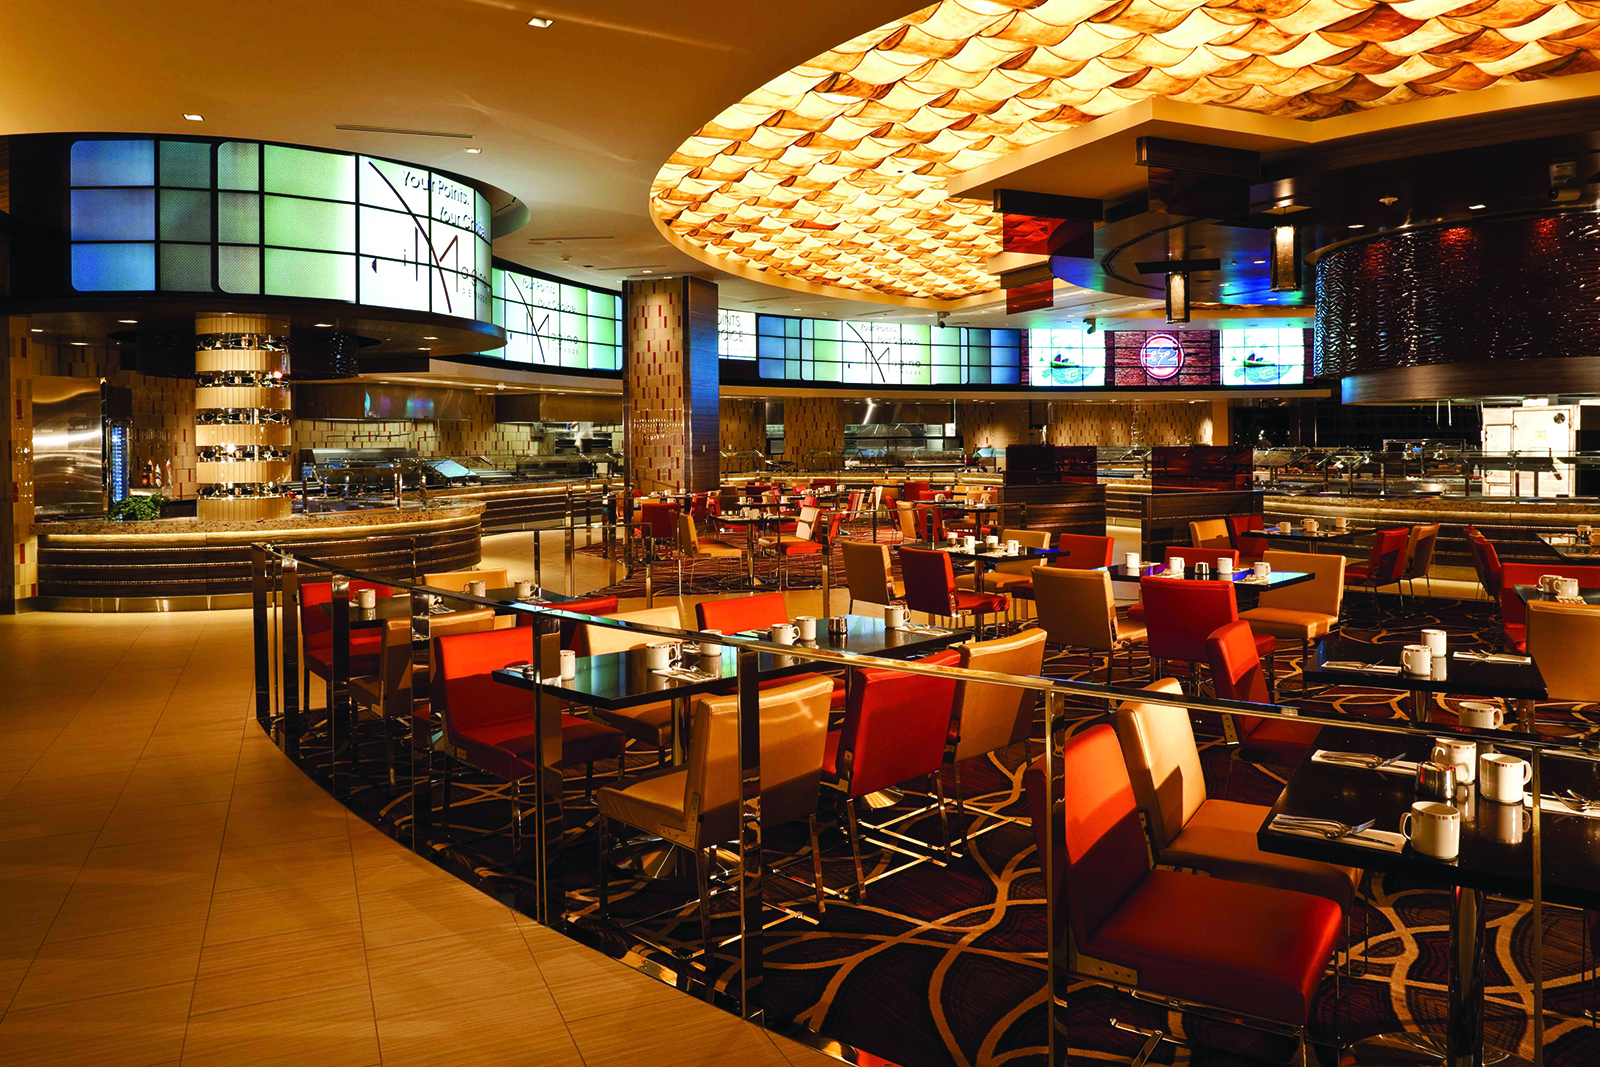 Studio B Buffet hours, prices, and discounts.  Located in The M Resort Henderson, NV Las Vegas, NV.